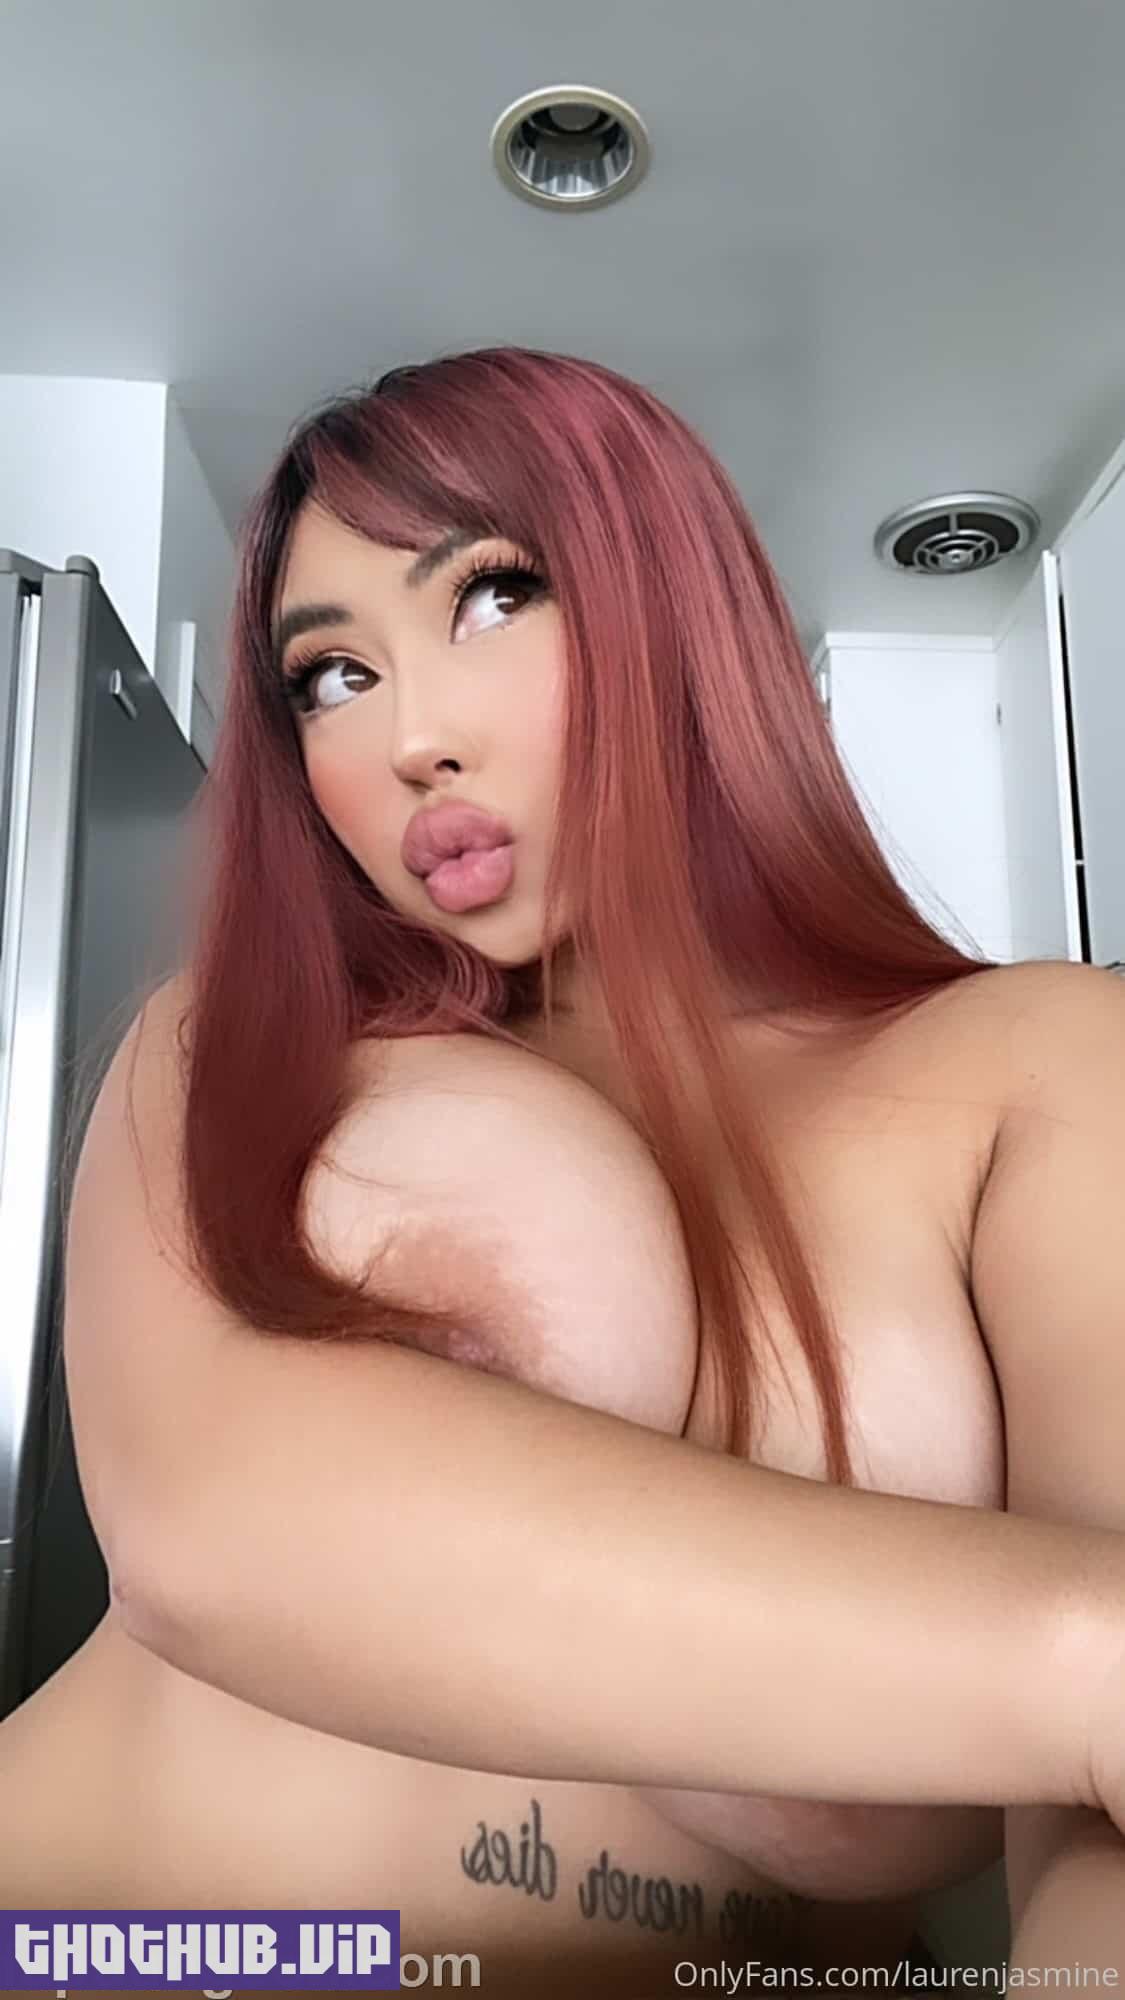 1661002167 571 LaurenJasmine %E2%80%93 Big Tits Thick Asian Onlyfans Nudes